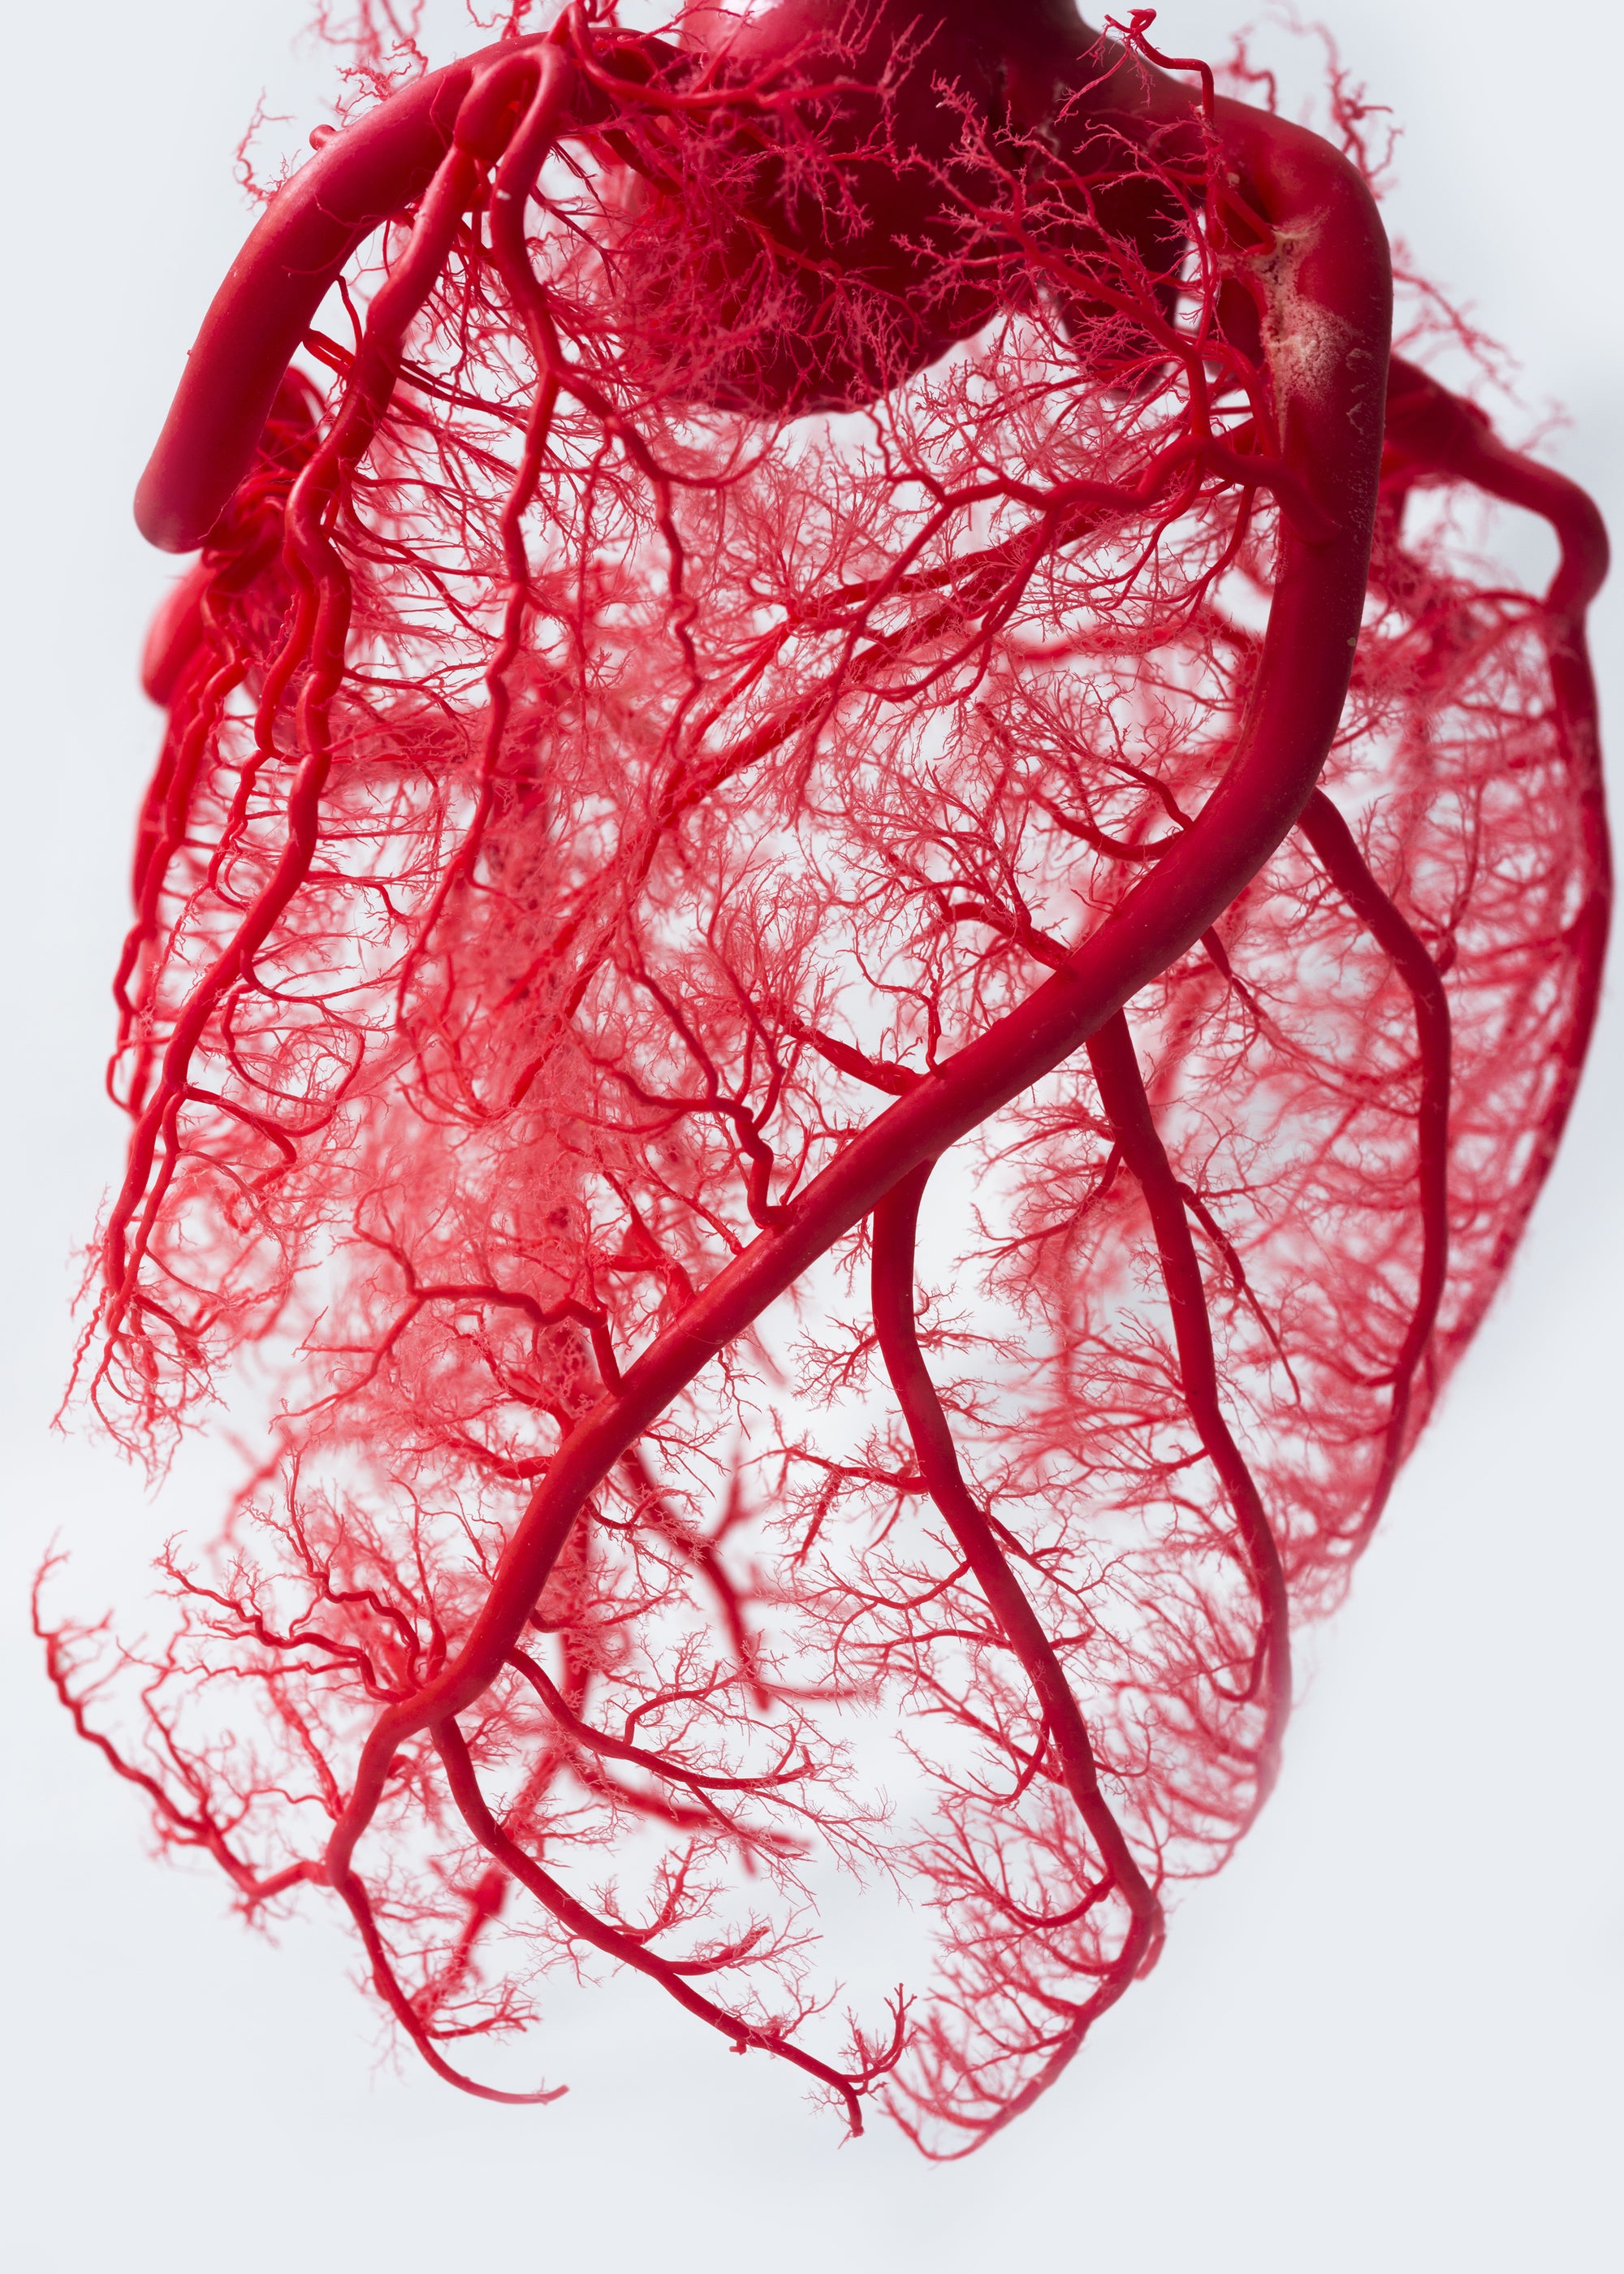 A red human heart is shown on a white background.